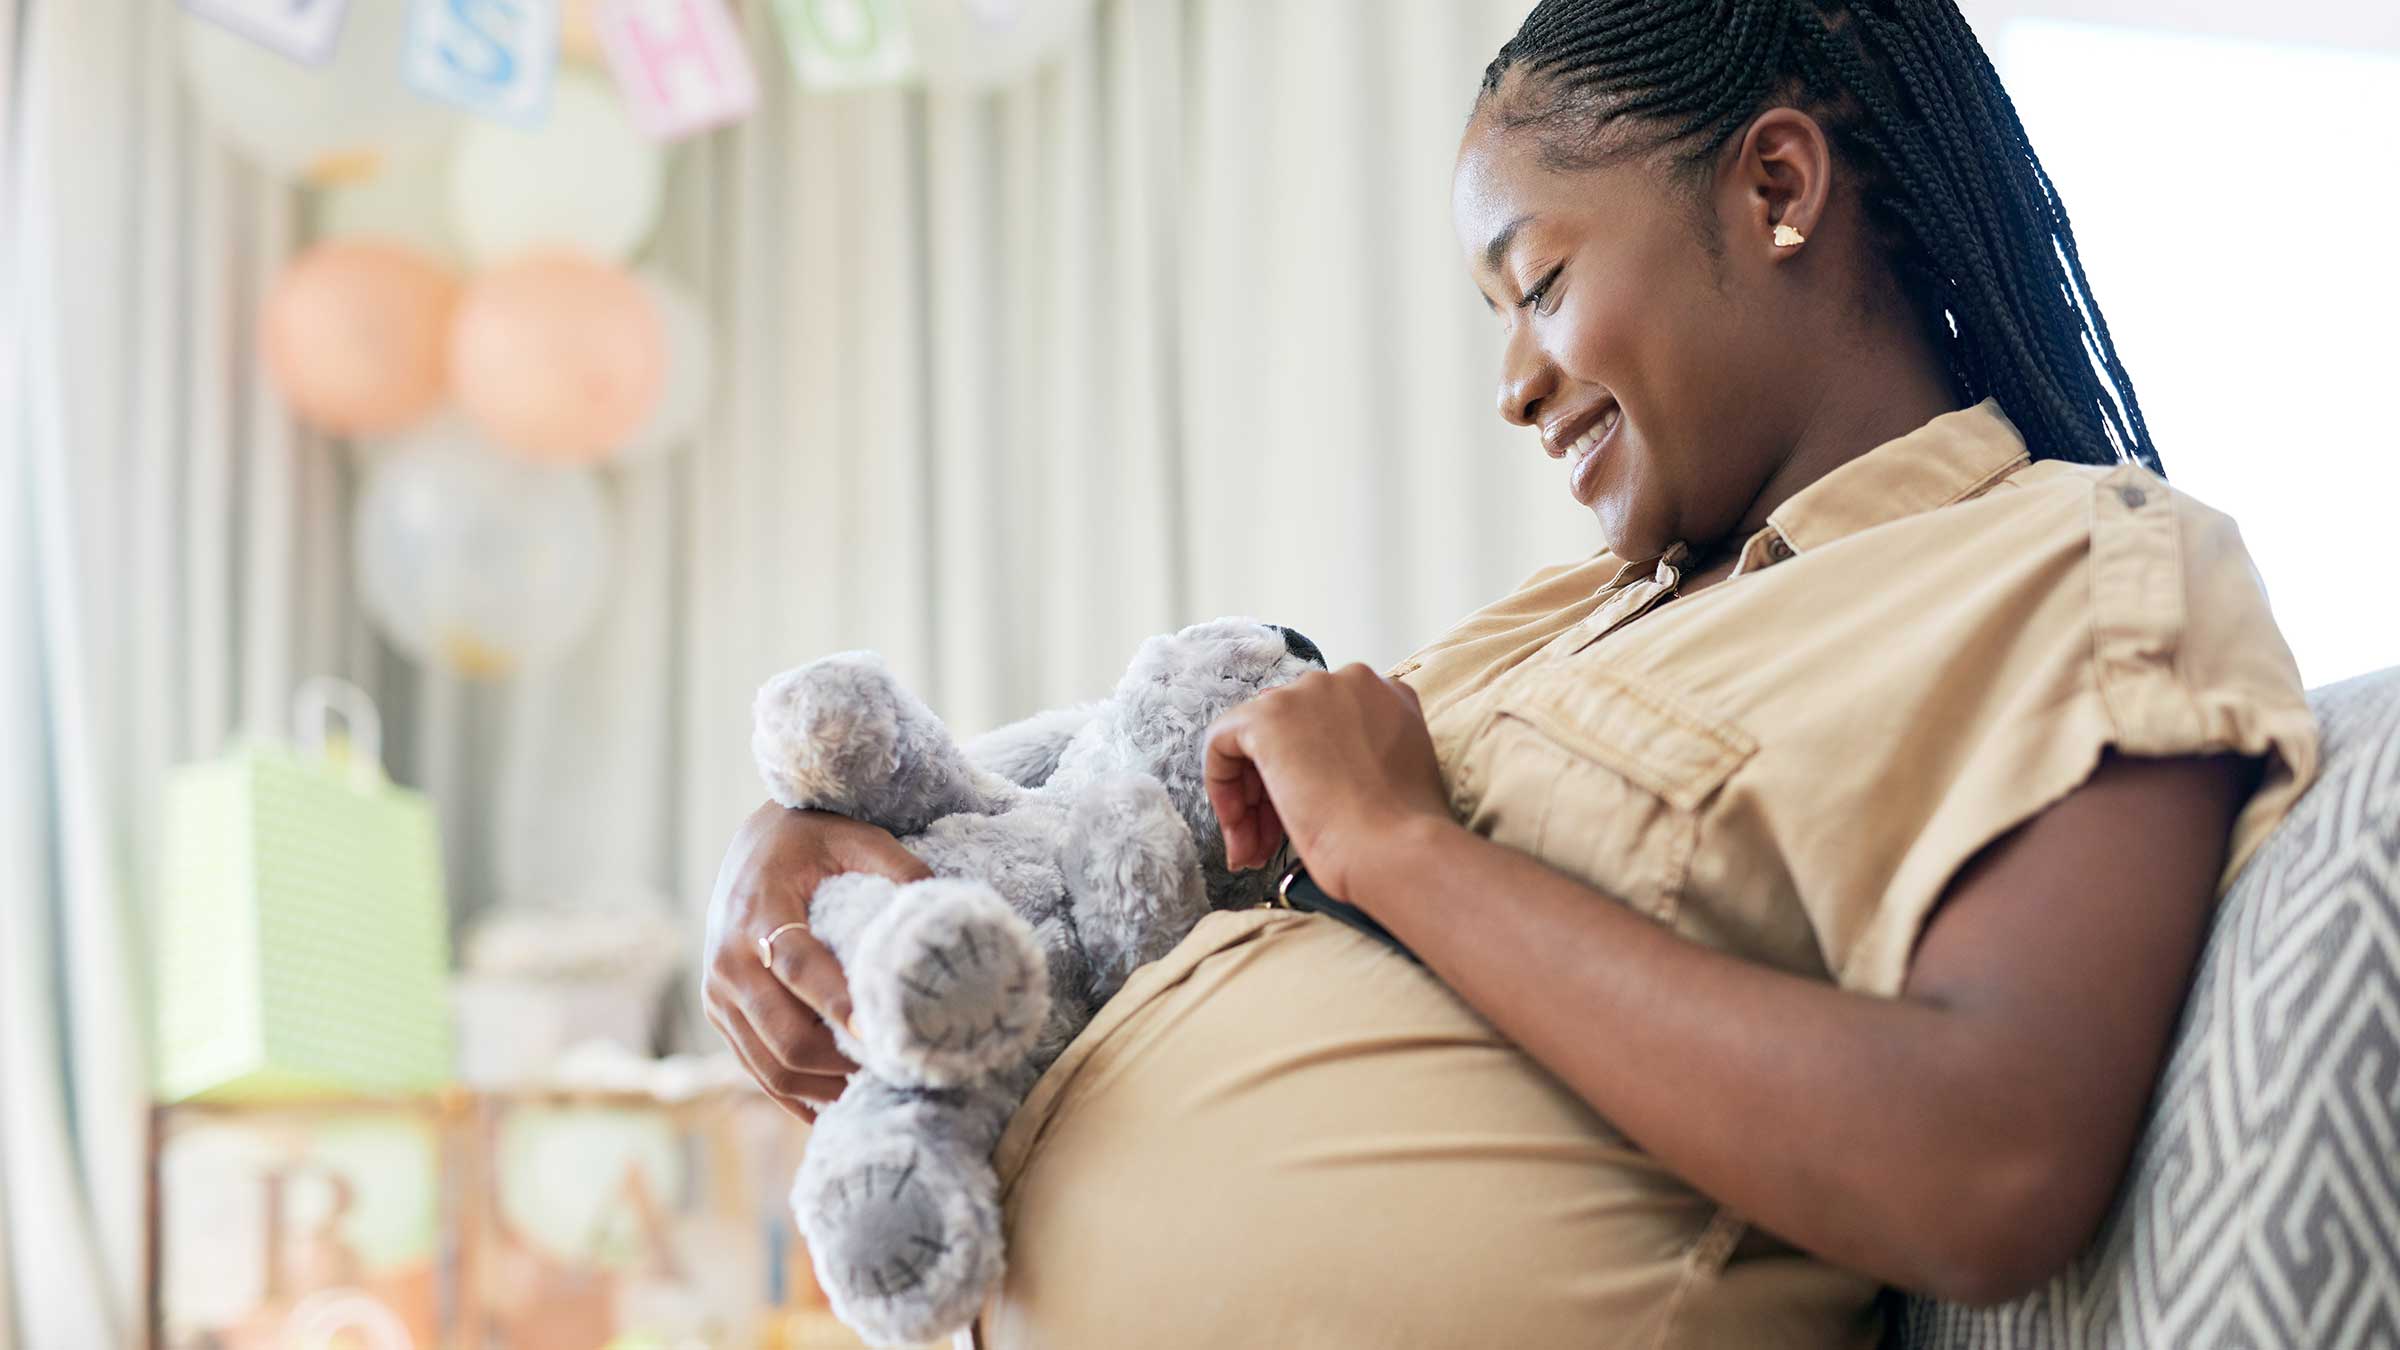 Pregnant woman sitting in a chair holding a stuffed animal